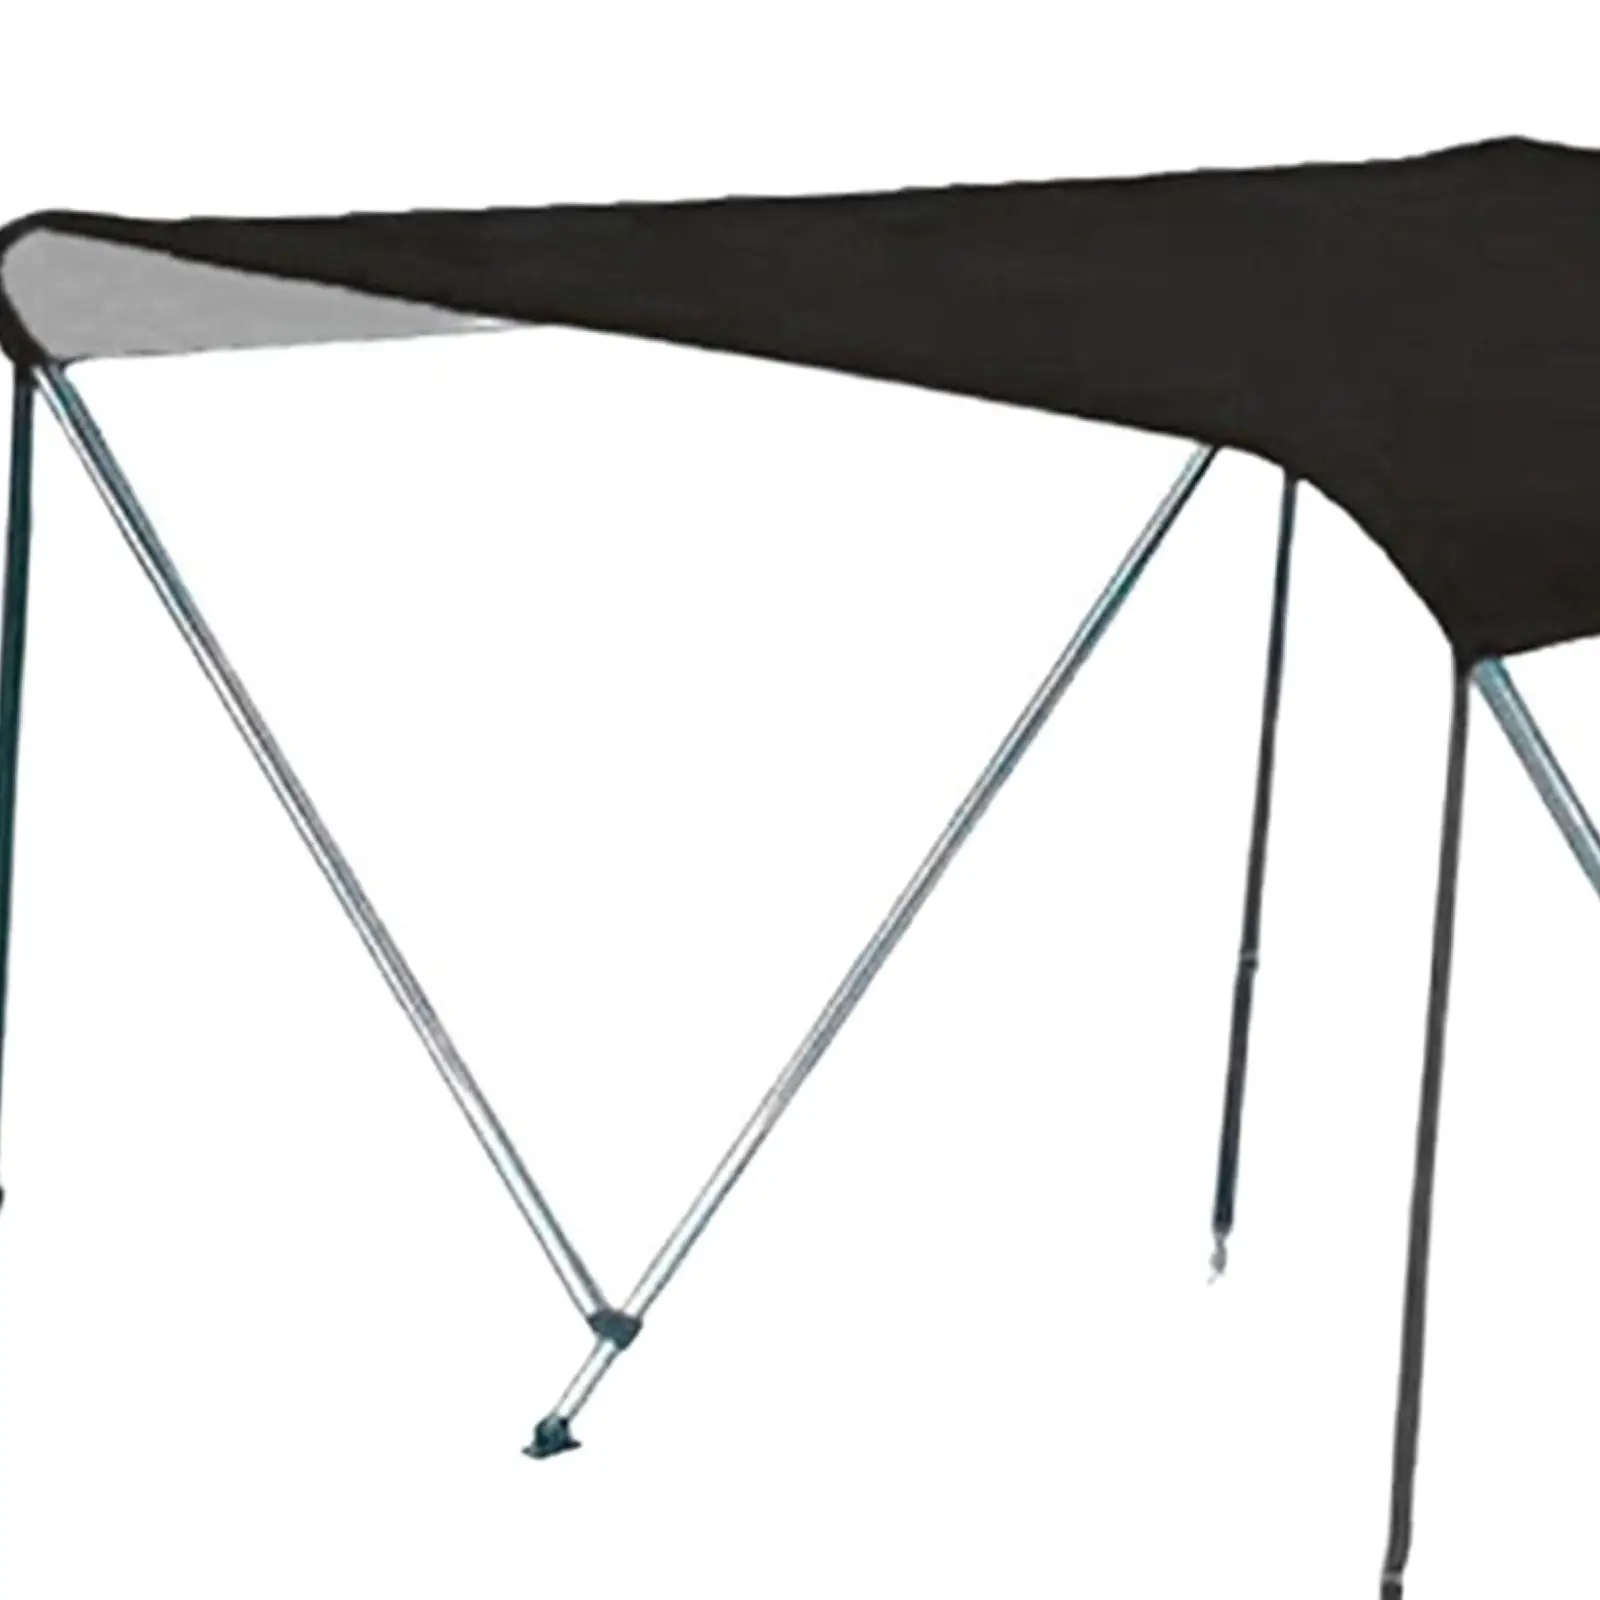 Boat Bimini Top Cover Boat Canopy for Kayak with A Width of 1-1.4 Meters